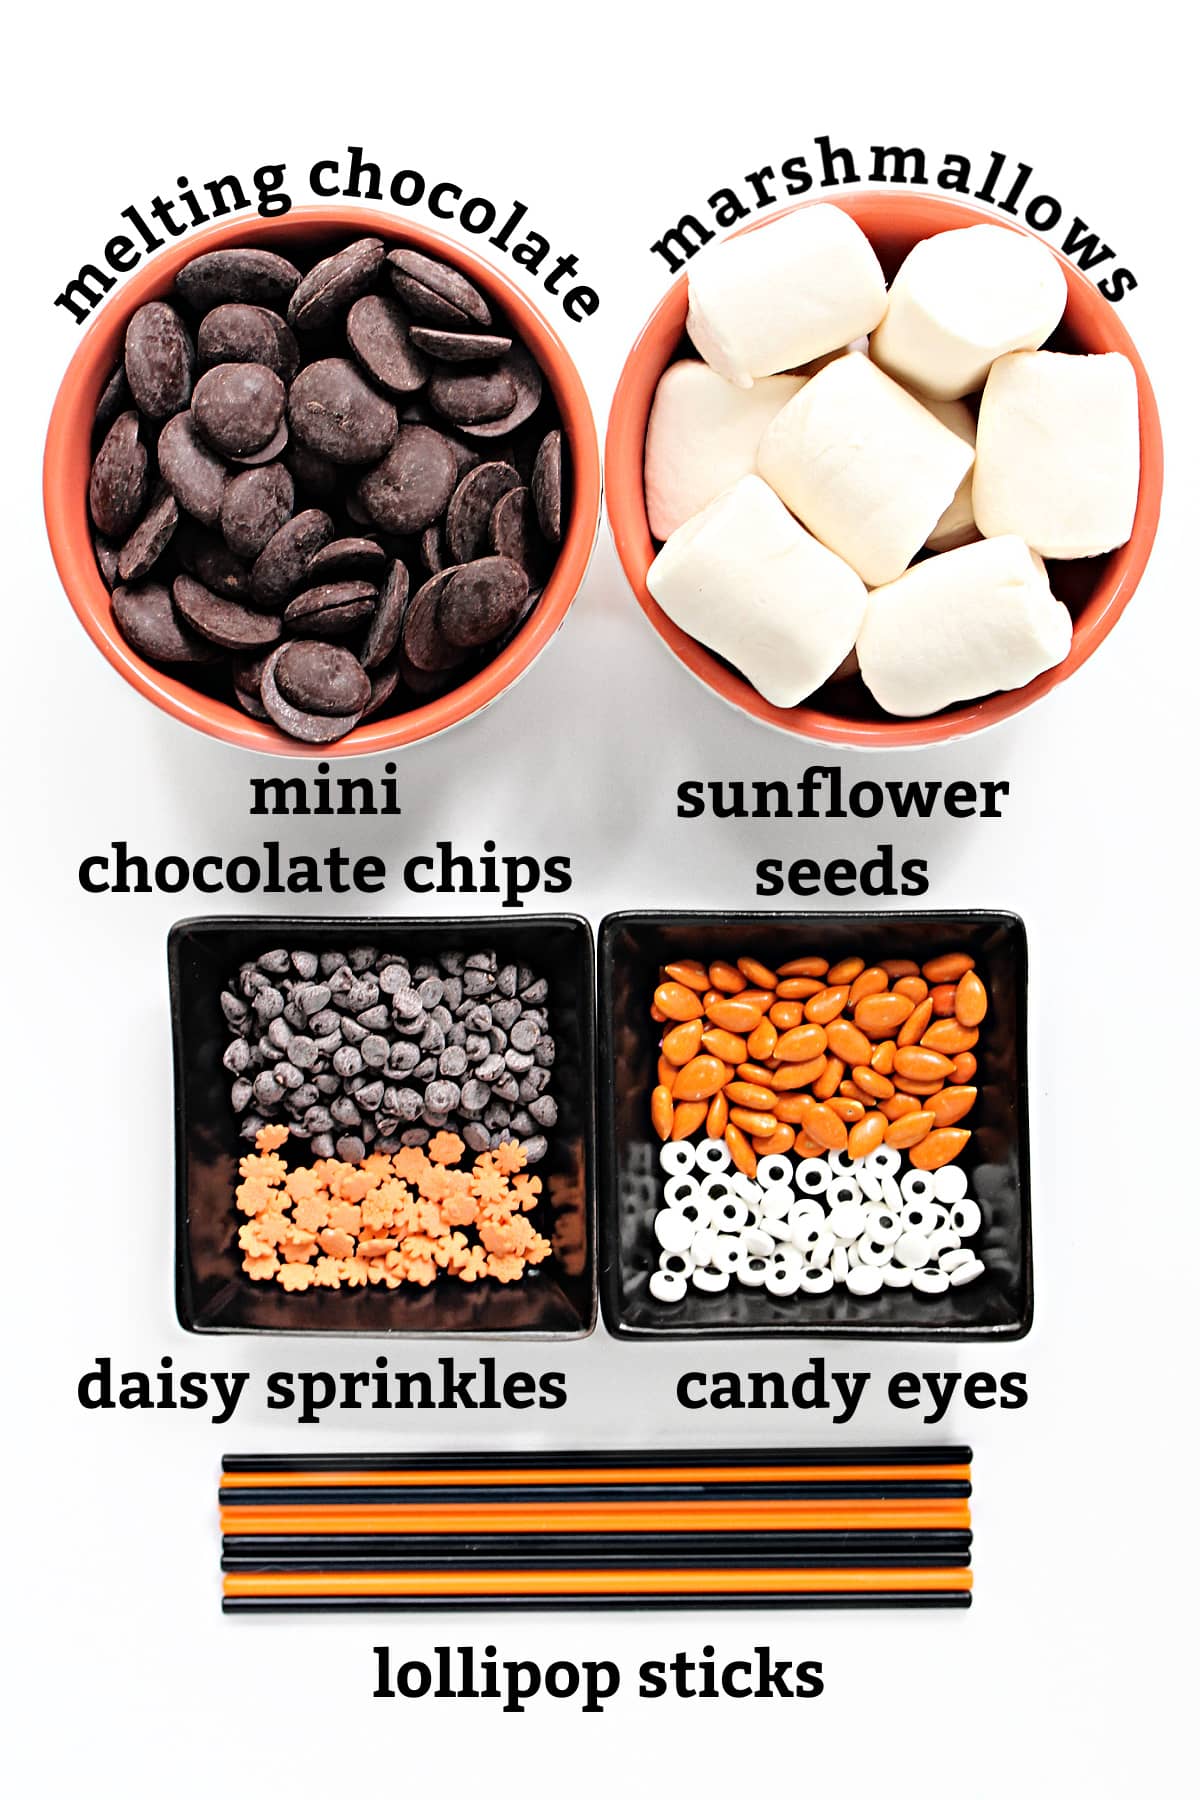 Labeled recipe ingredients: melting chocolate, marshmallows, mini chocolate chips, sunflower seeds,  sprinkles, candy eyes, lollipop sticks.